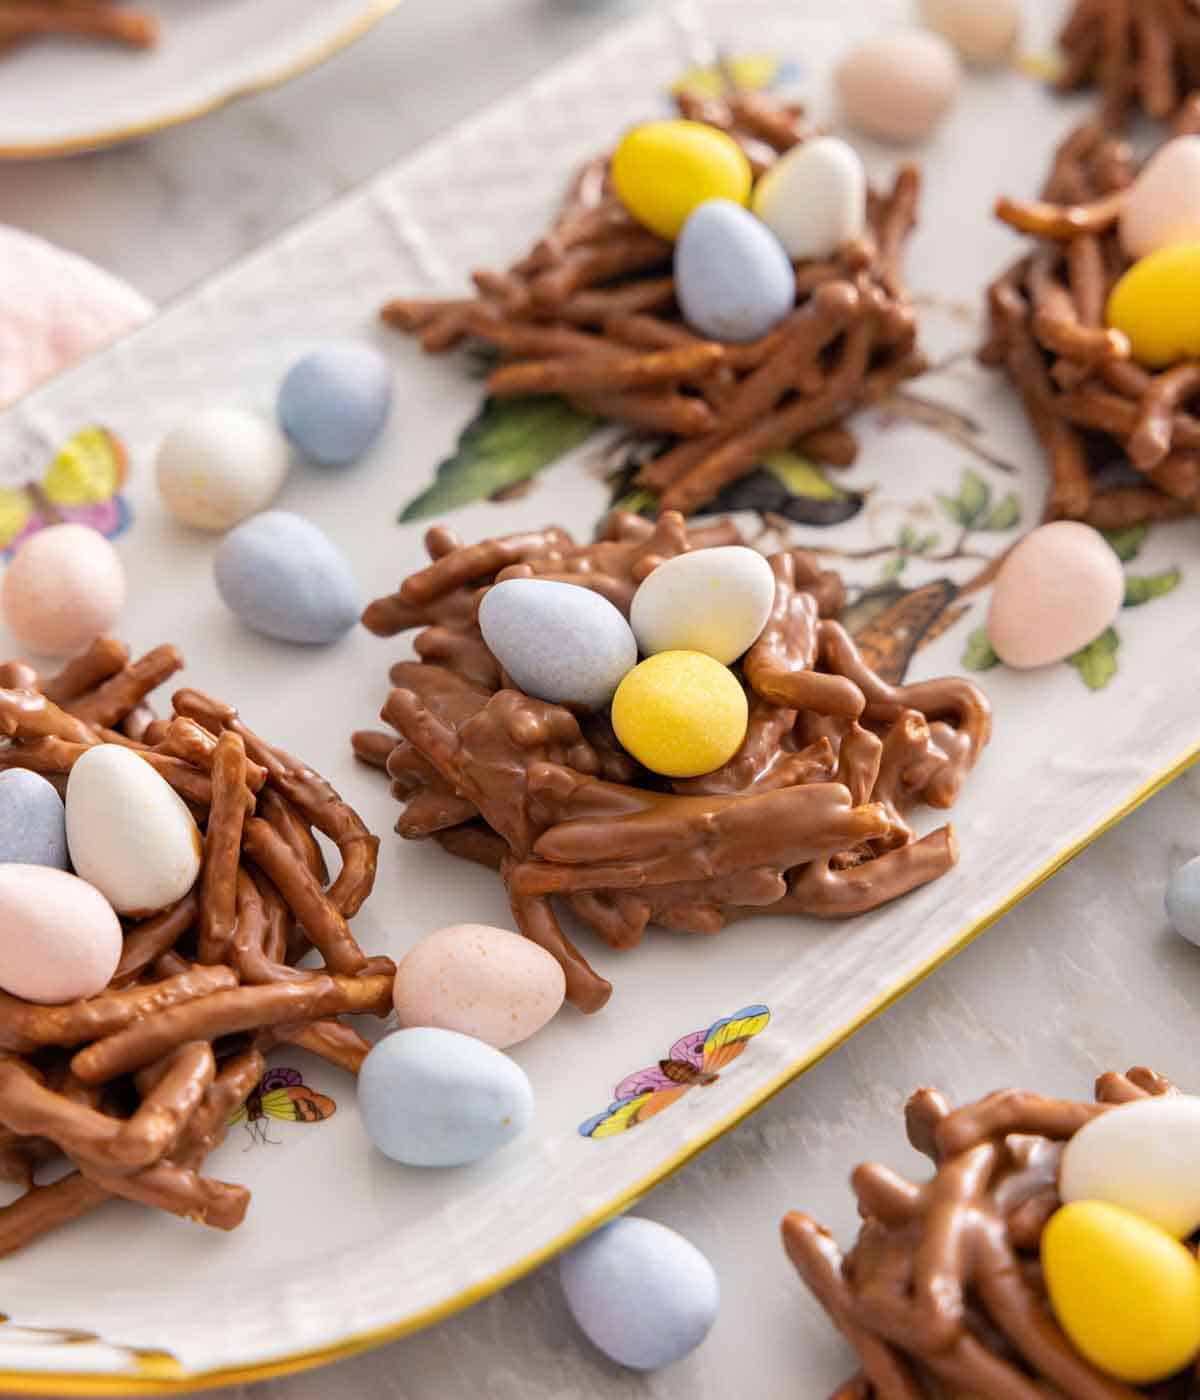 A platter of birds nest cookies with candy eggs scattered around.